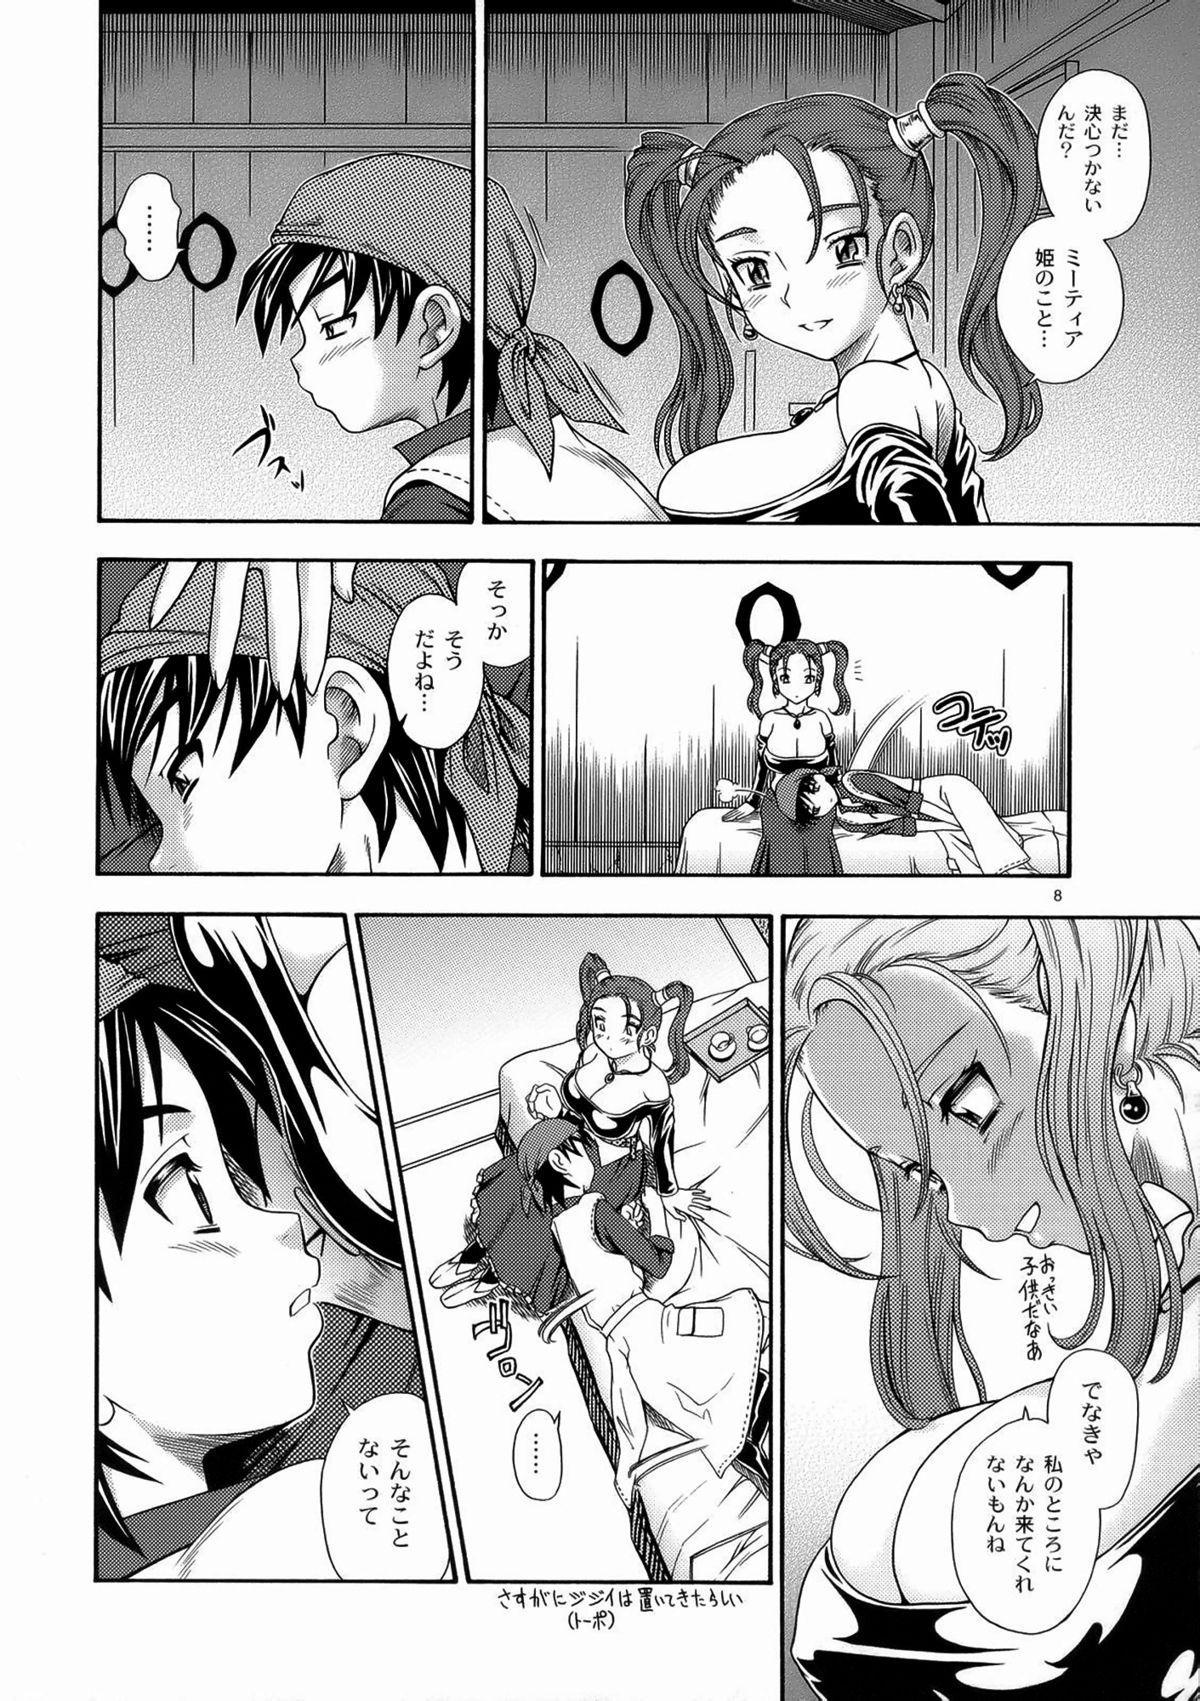 Whipping Jessica Milk 8.0 - Dragon quest viii Dick Sucking - Page 7